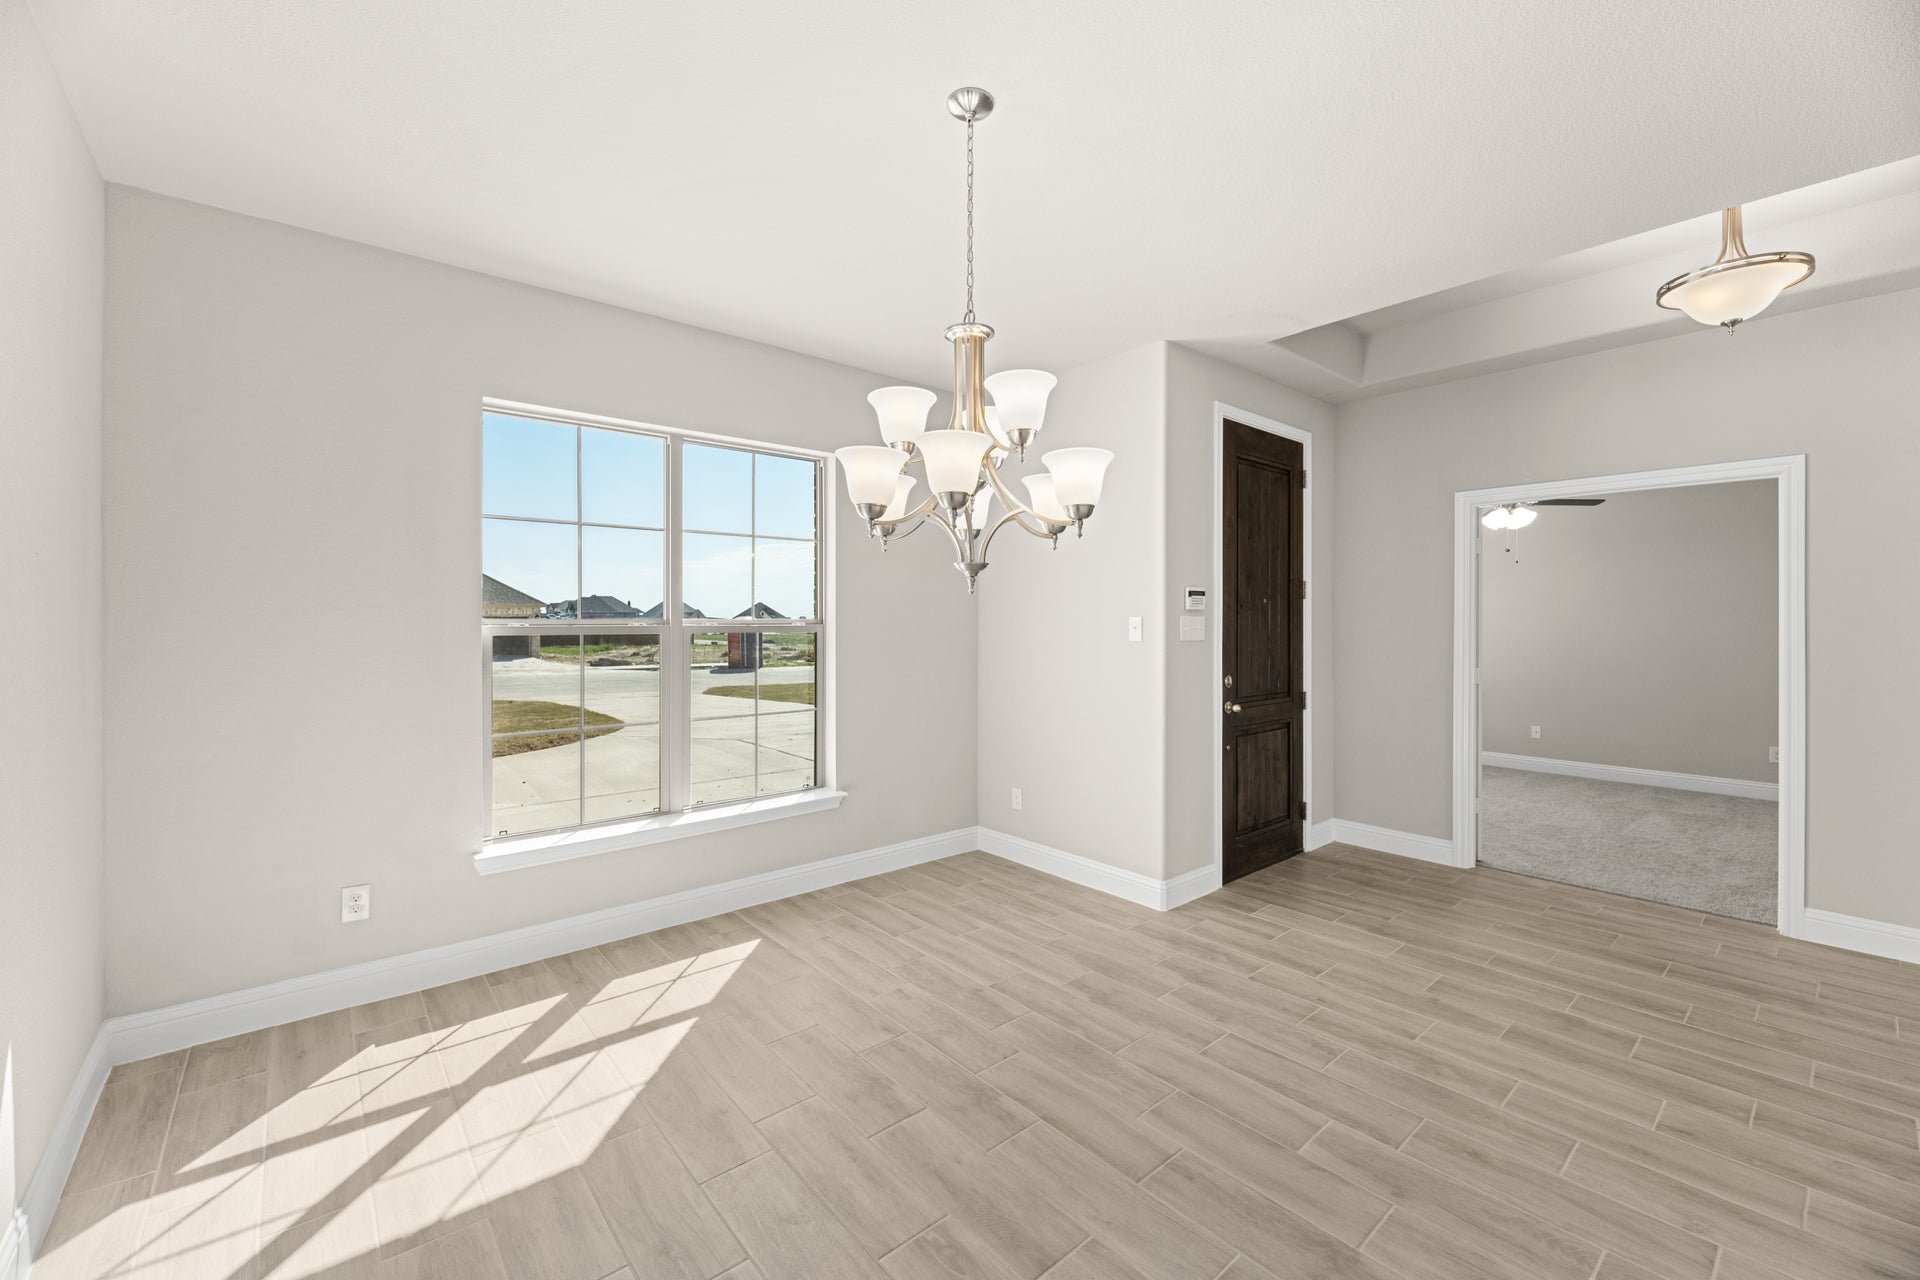 2,972sf New Home in Midlothian, TX